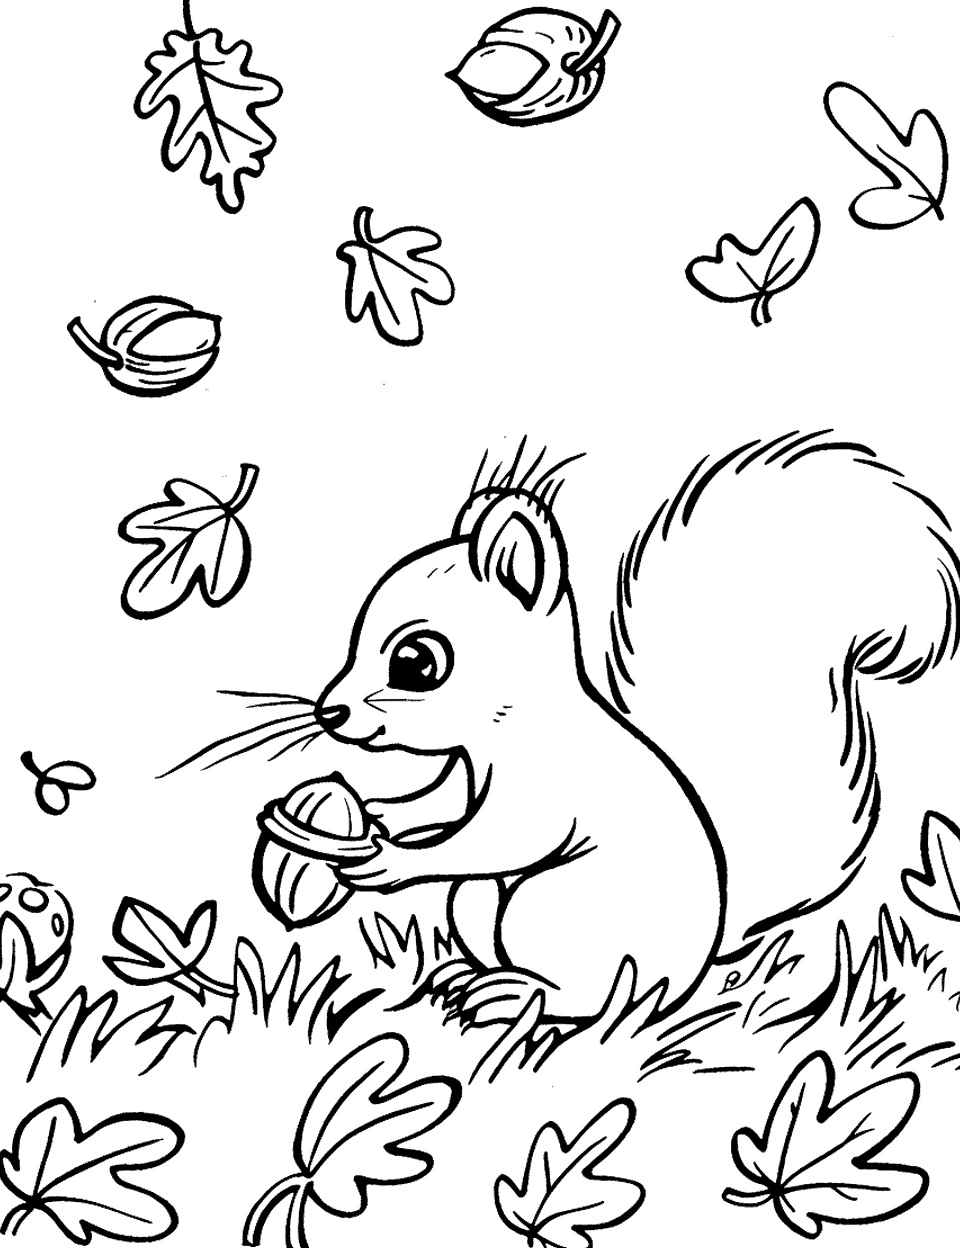 Squirrel Collecting Acorns Garden Coloring Page - A squirrel gathering acorns in a fall-themed garden with fallen leaves.